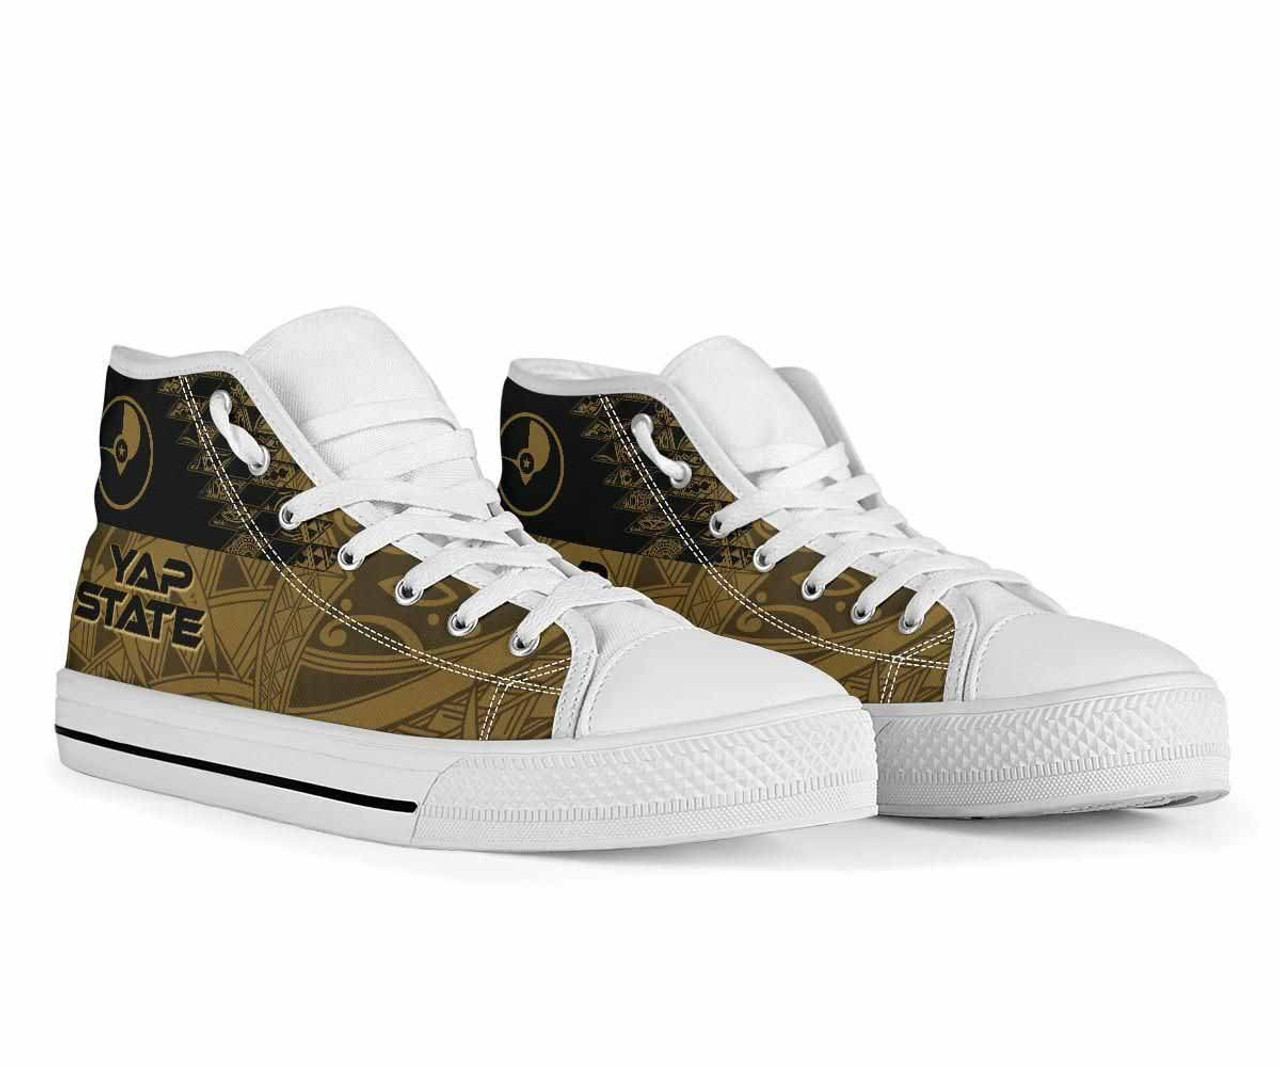 Yap State High Top Shoes - Gold Color Symmetry Style 2